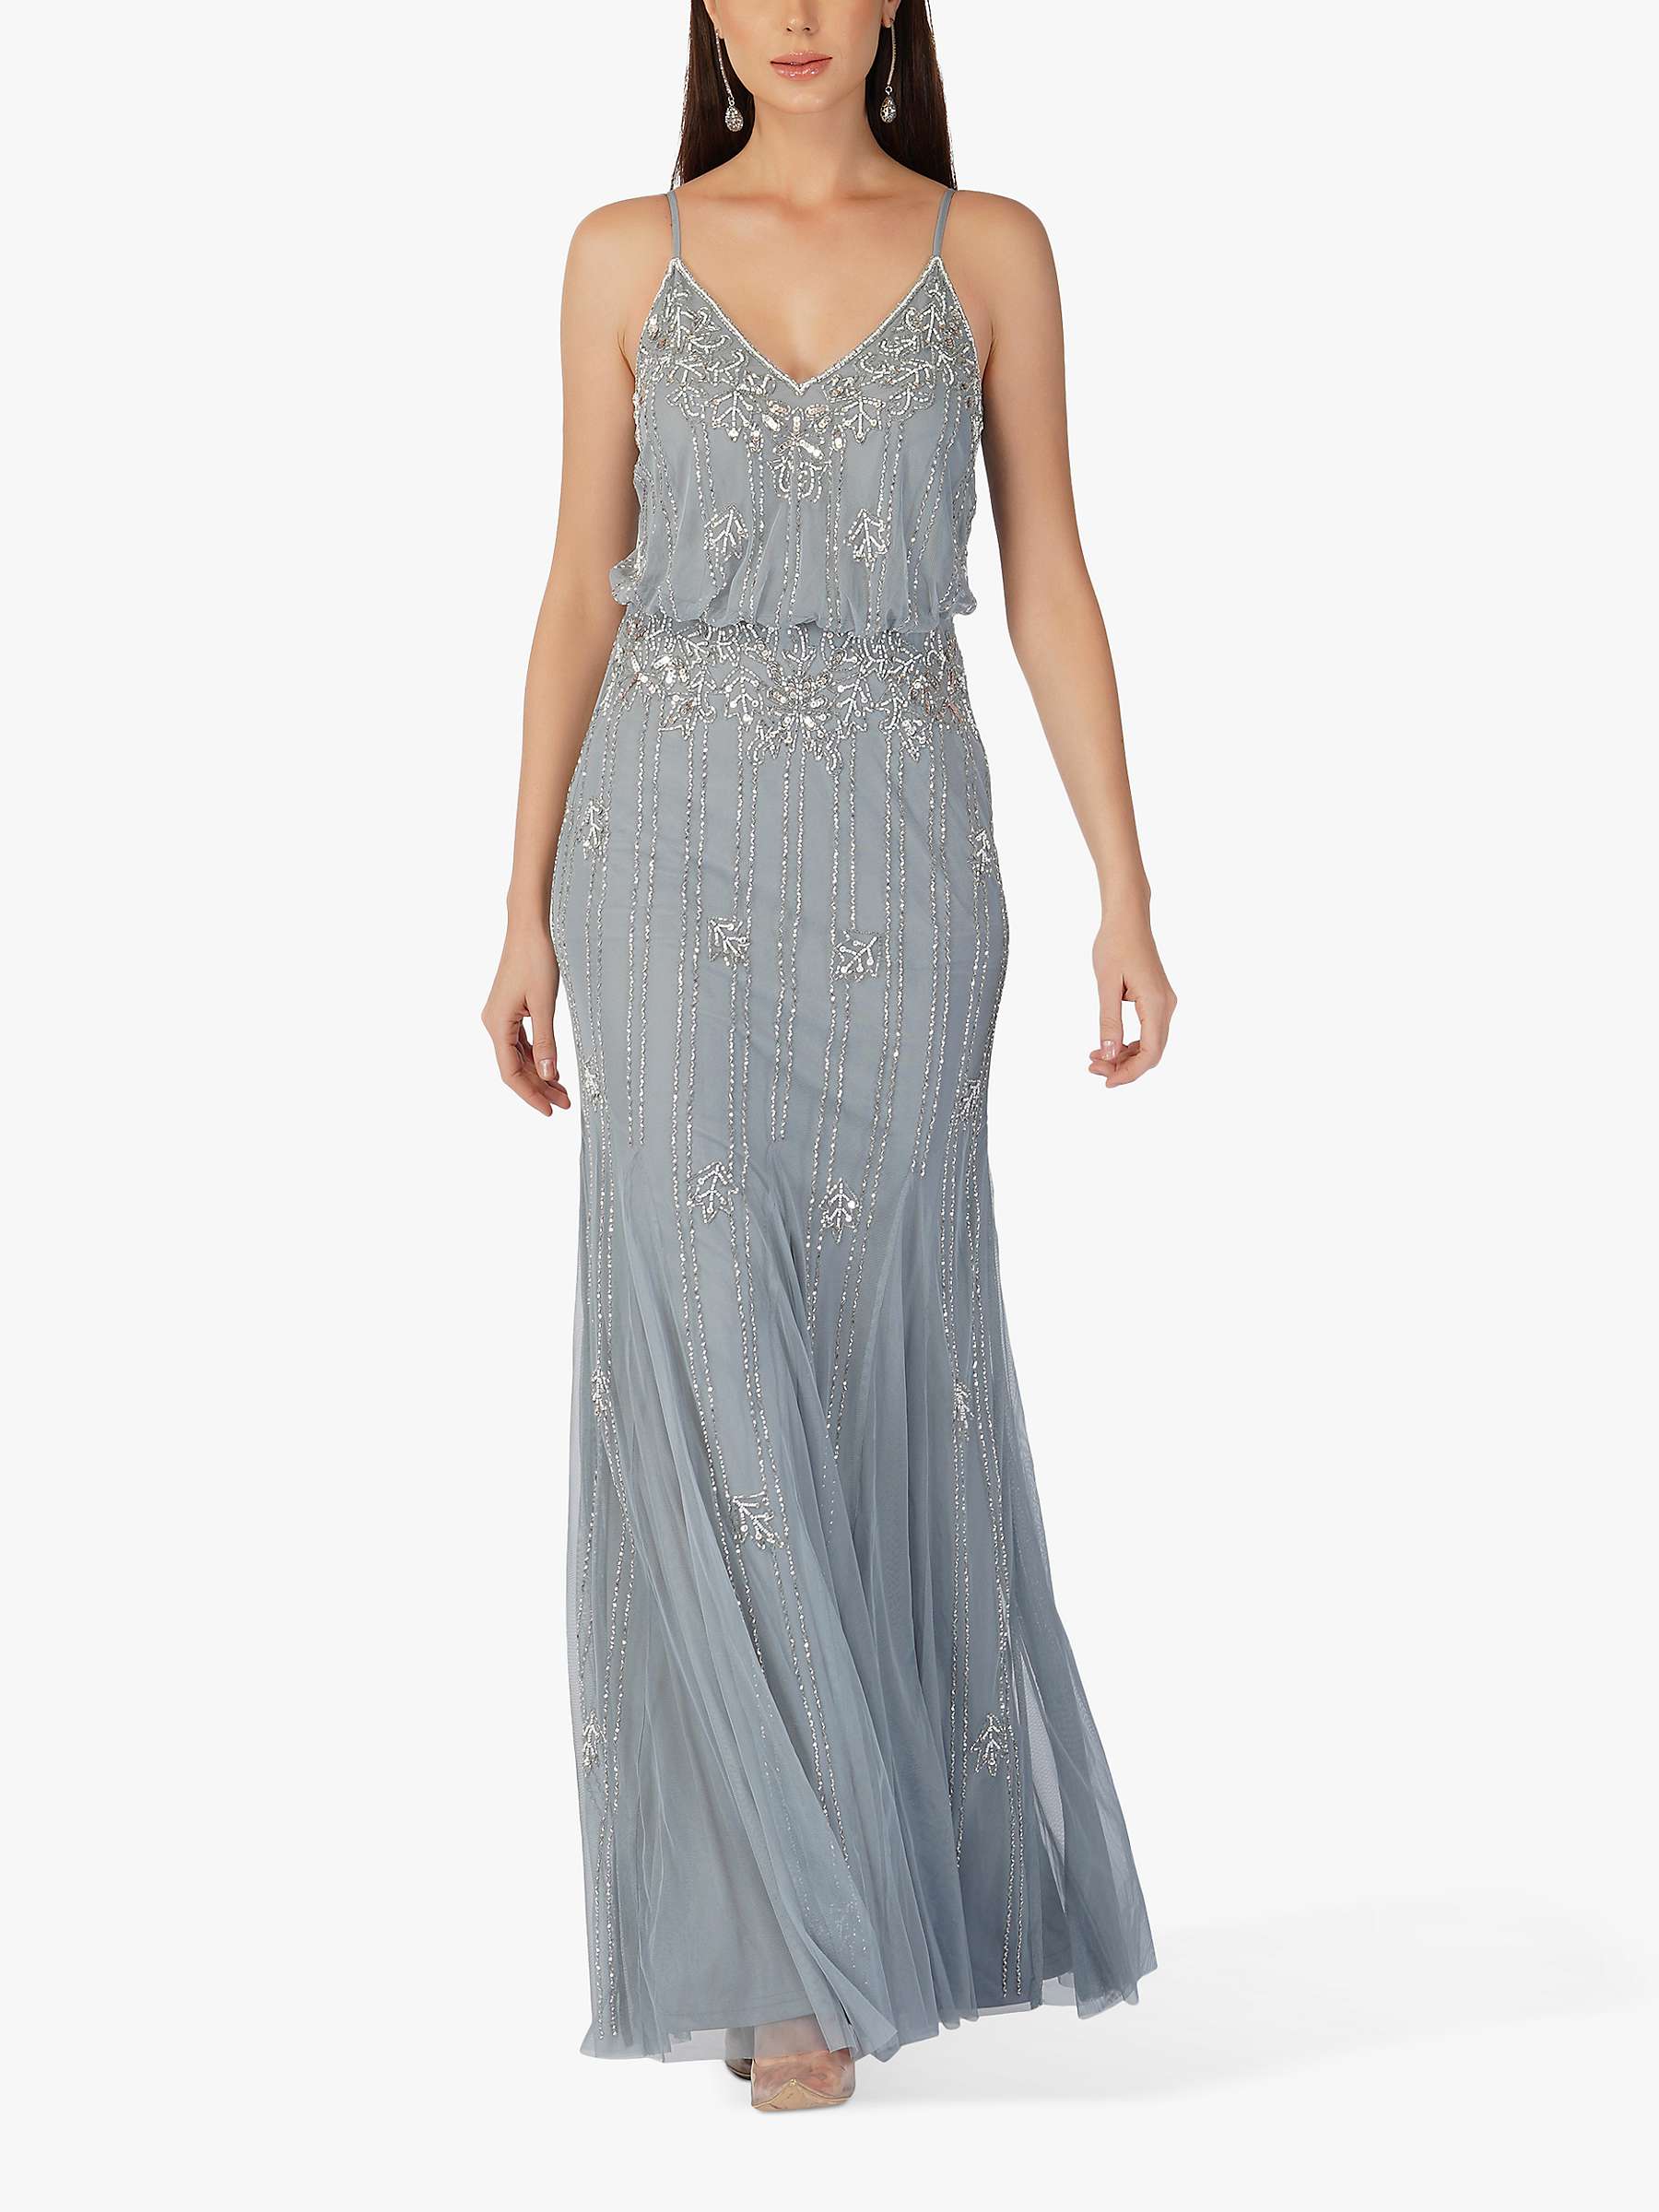 Buy Lace & Beads Keeva Maxi Dress, Blue/Grey Online at johnlewis.com